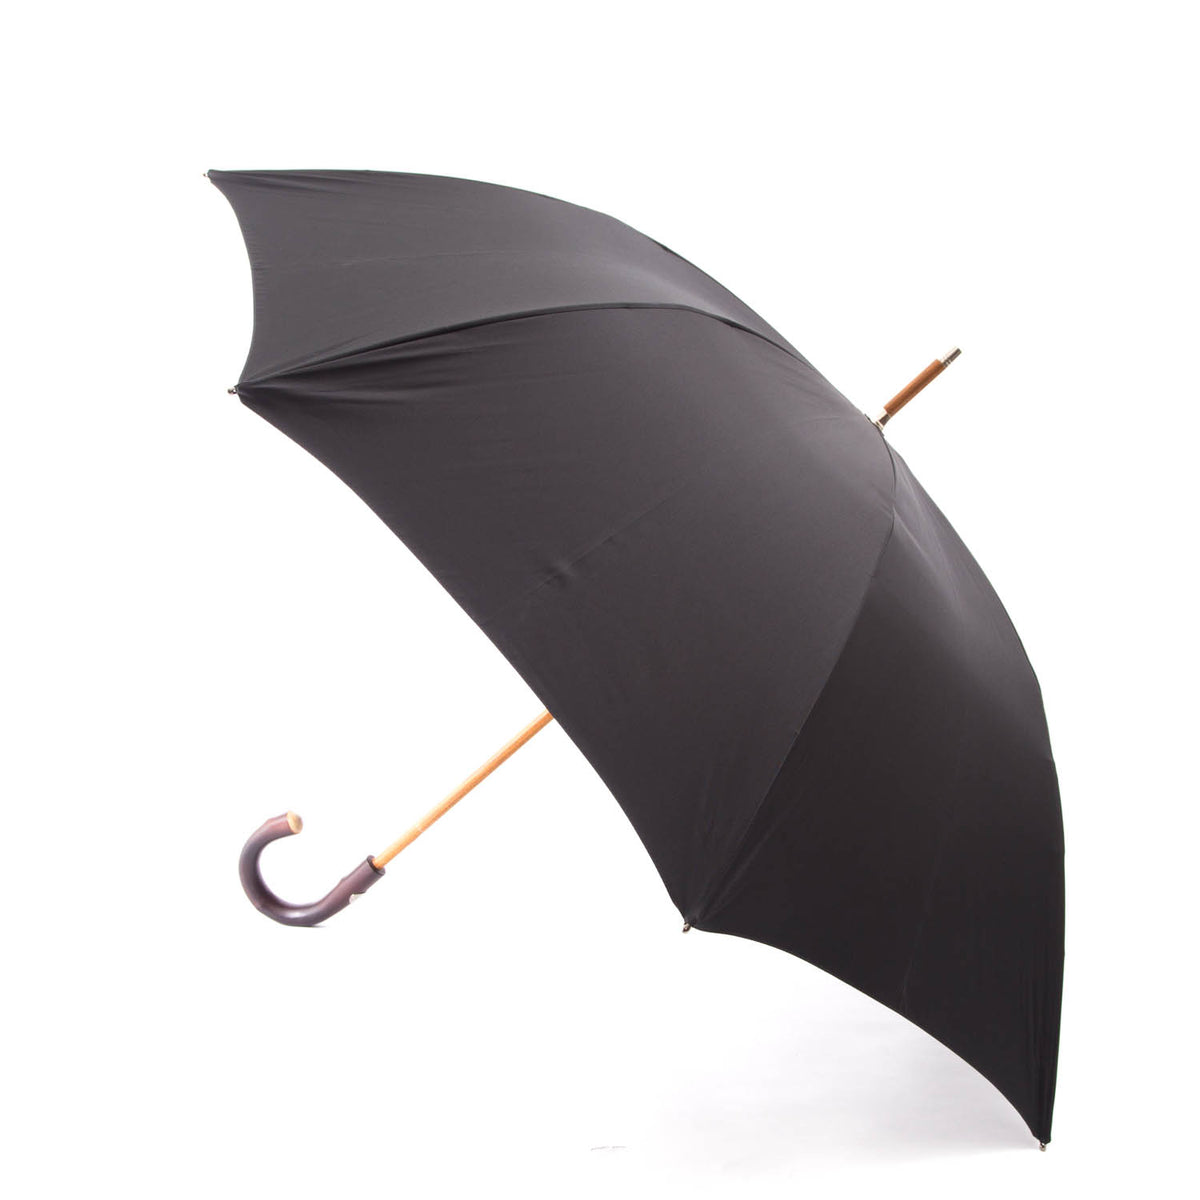 A Black Doorman Umbrella with Chestnut Handle from KirbyAllison.com with rain protection on a white background.